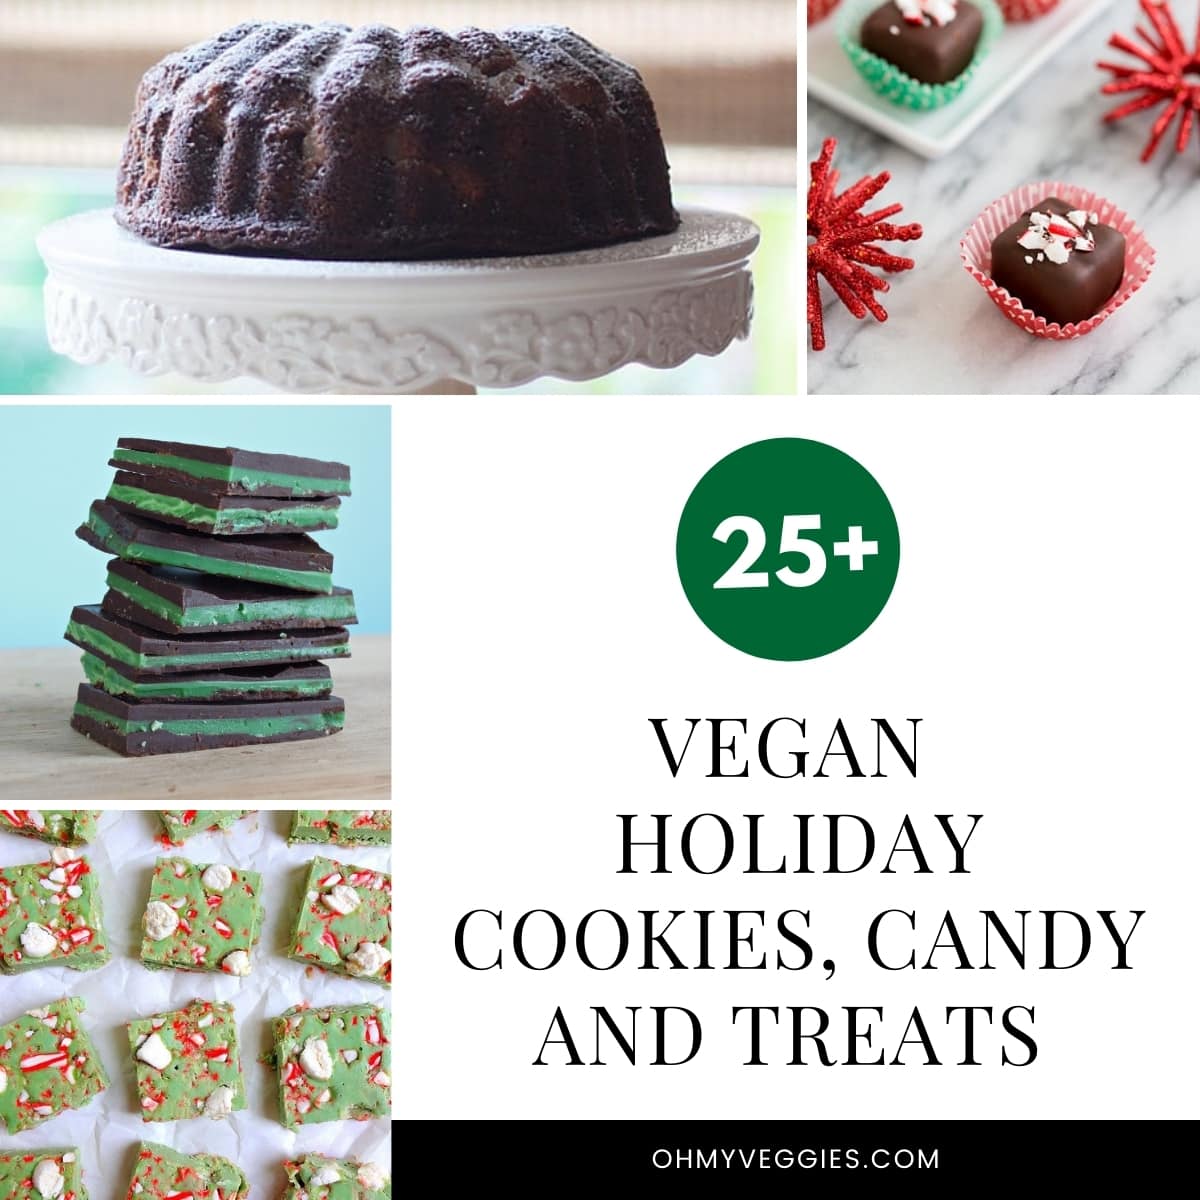 Vegan Holiday Cookies, Candy, and Treats